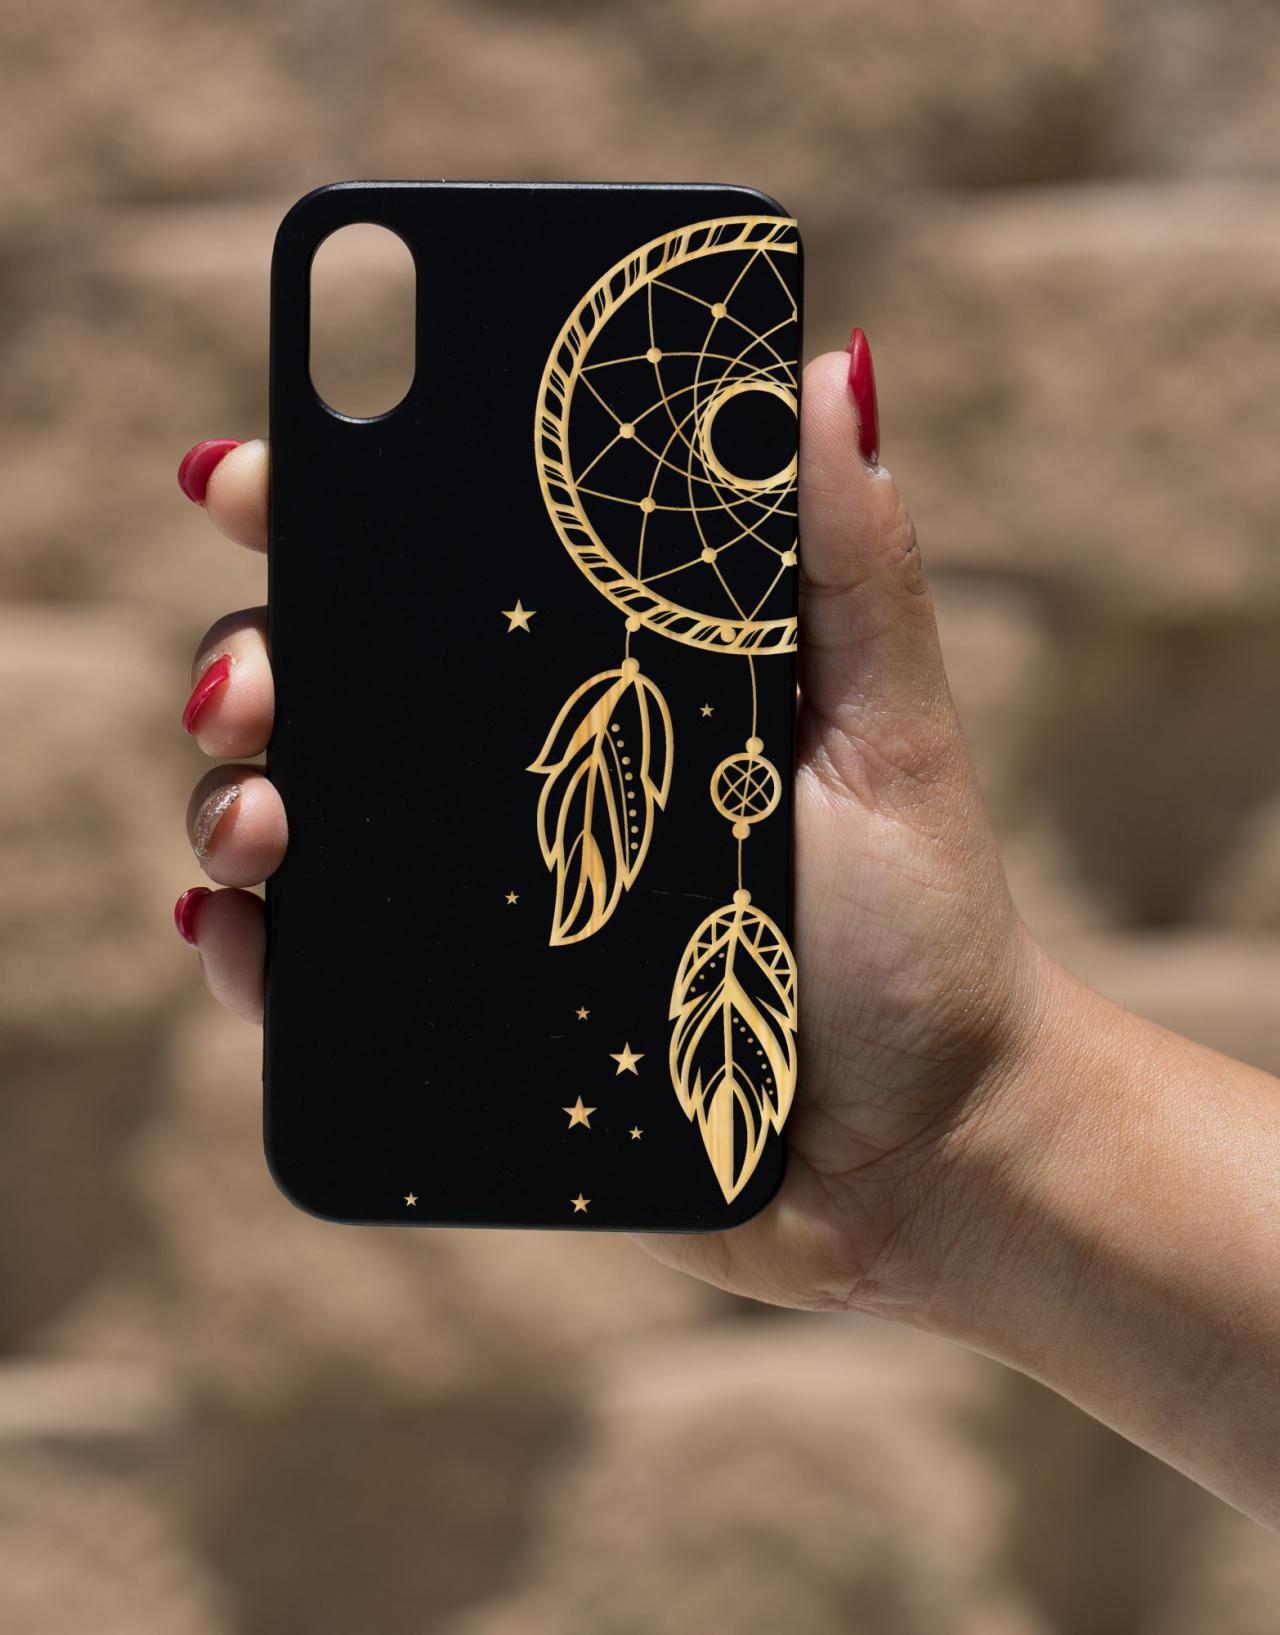 Dream catcher IPhone X Case, Engraved Iphone X case, Wooden Engraved Iphone X Case, Iphone case, Beautiful Gift for here,unique case,